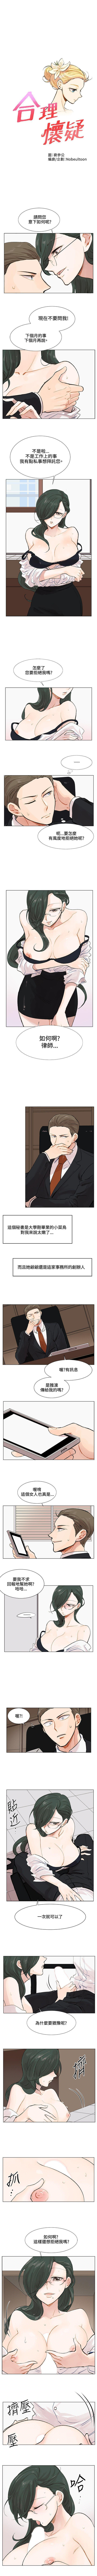 Tanned 合理懷疑 1-17 Hairy Sexy - Page 9